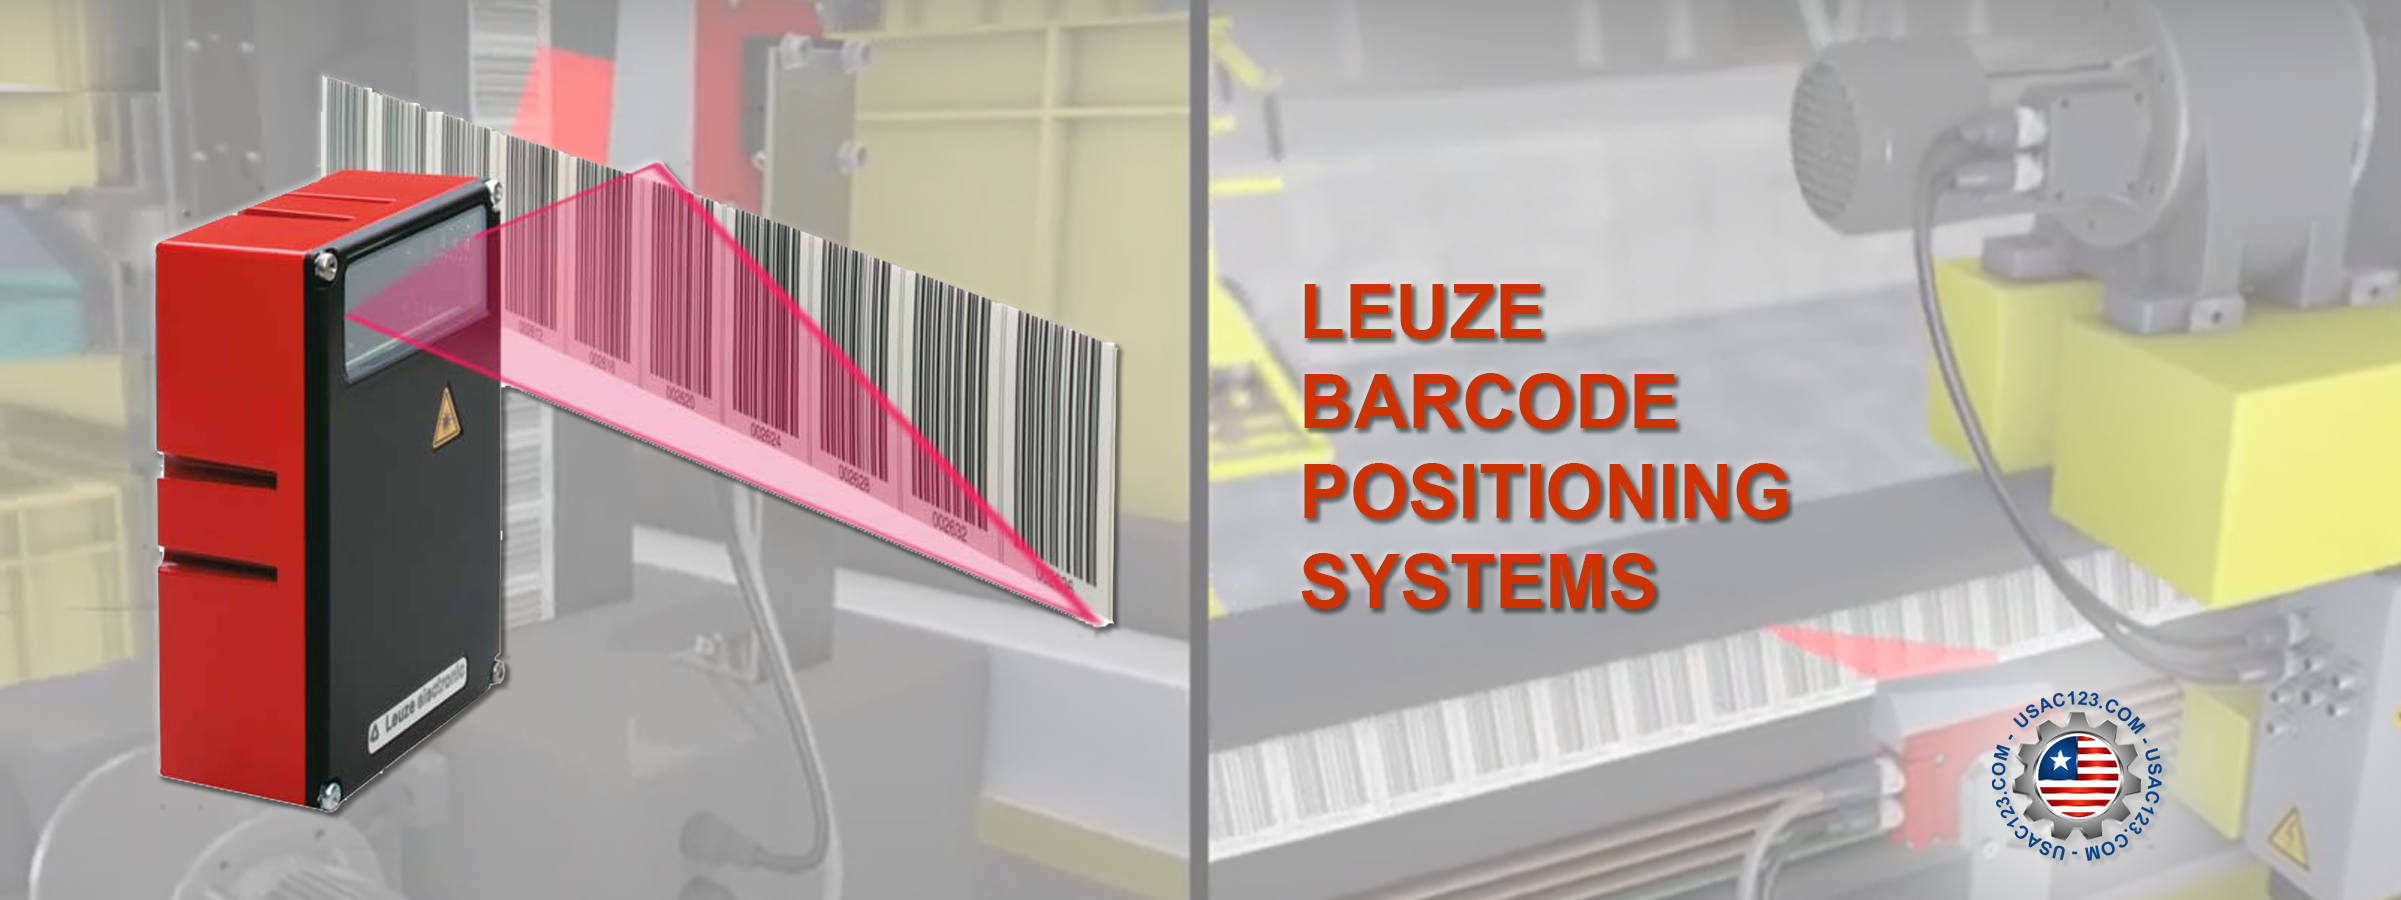 Barcode Positioning Systems